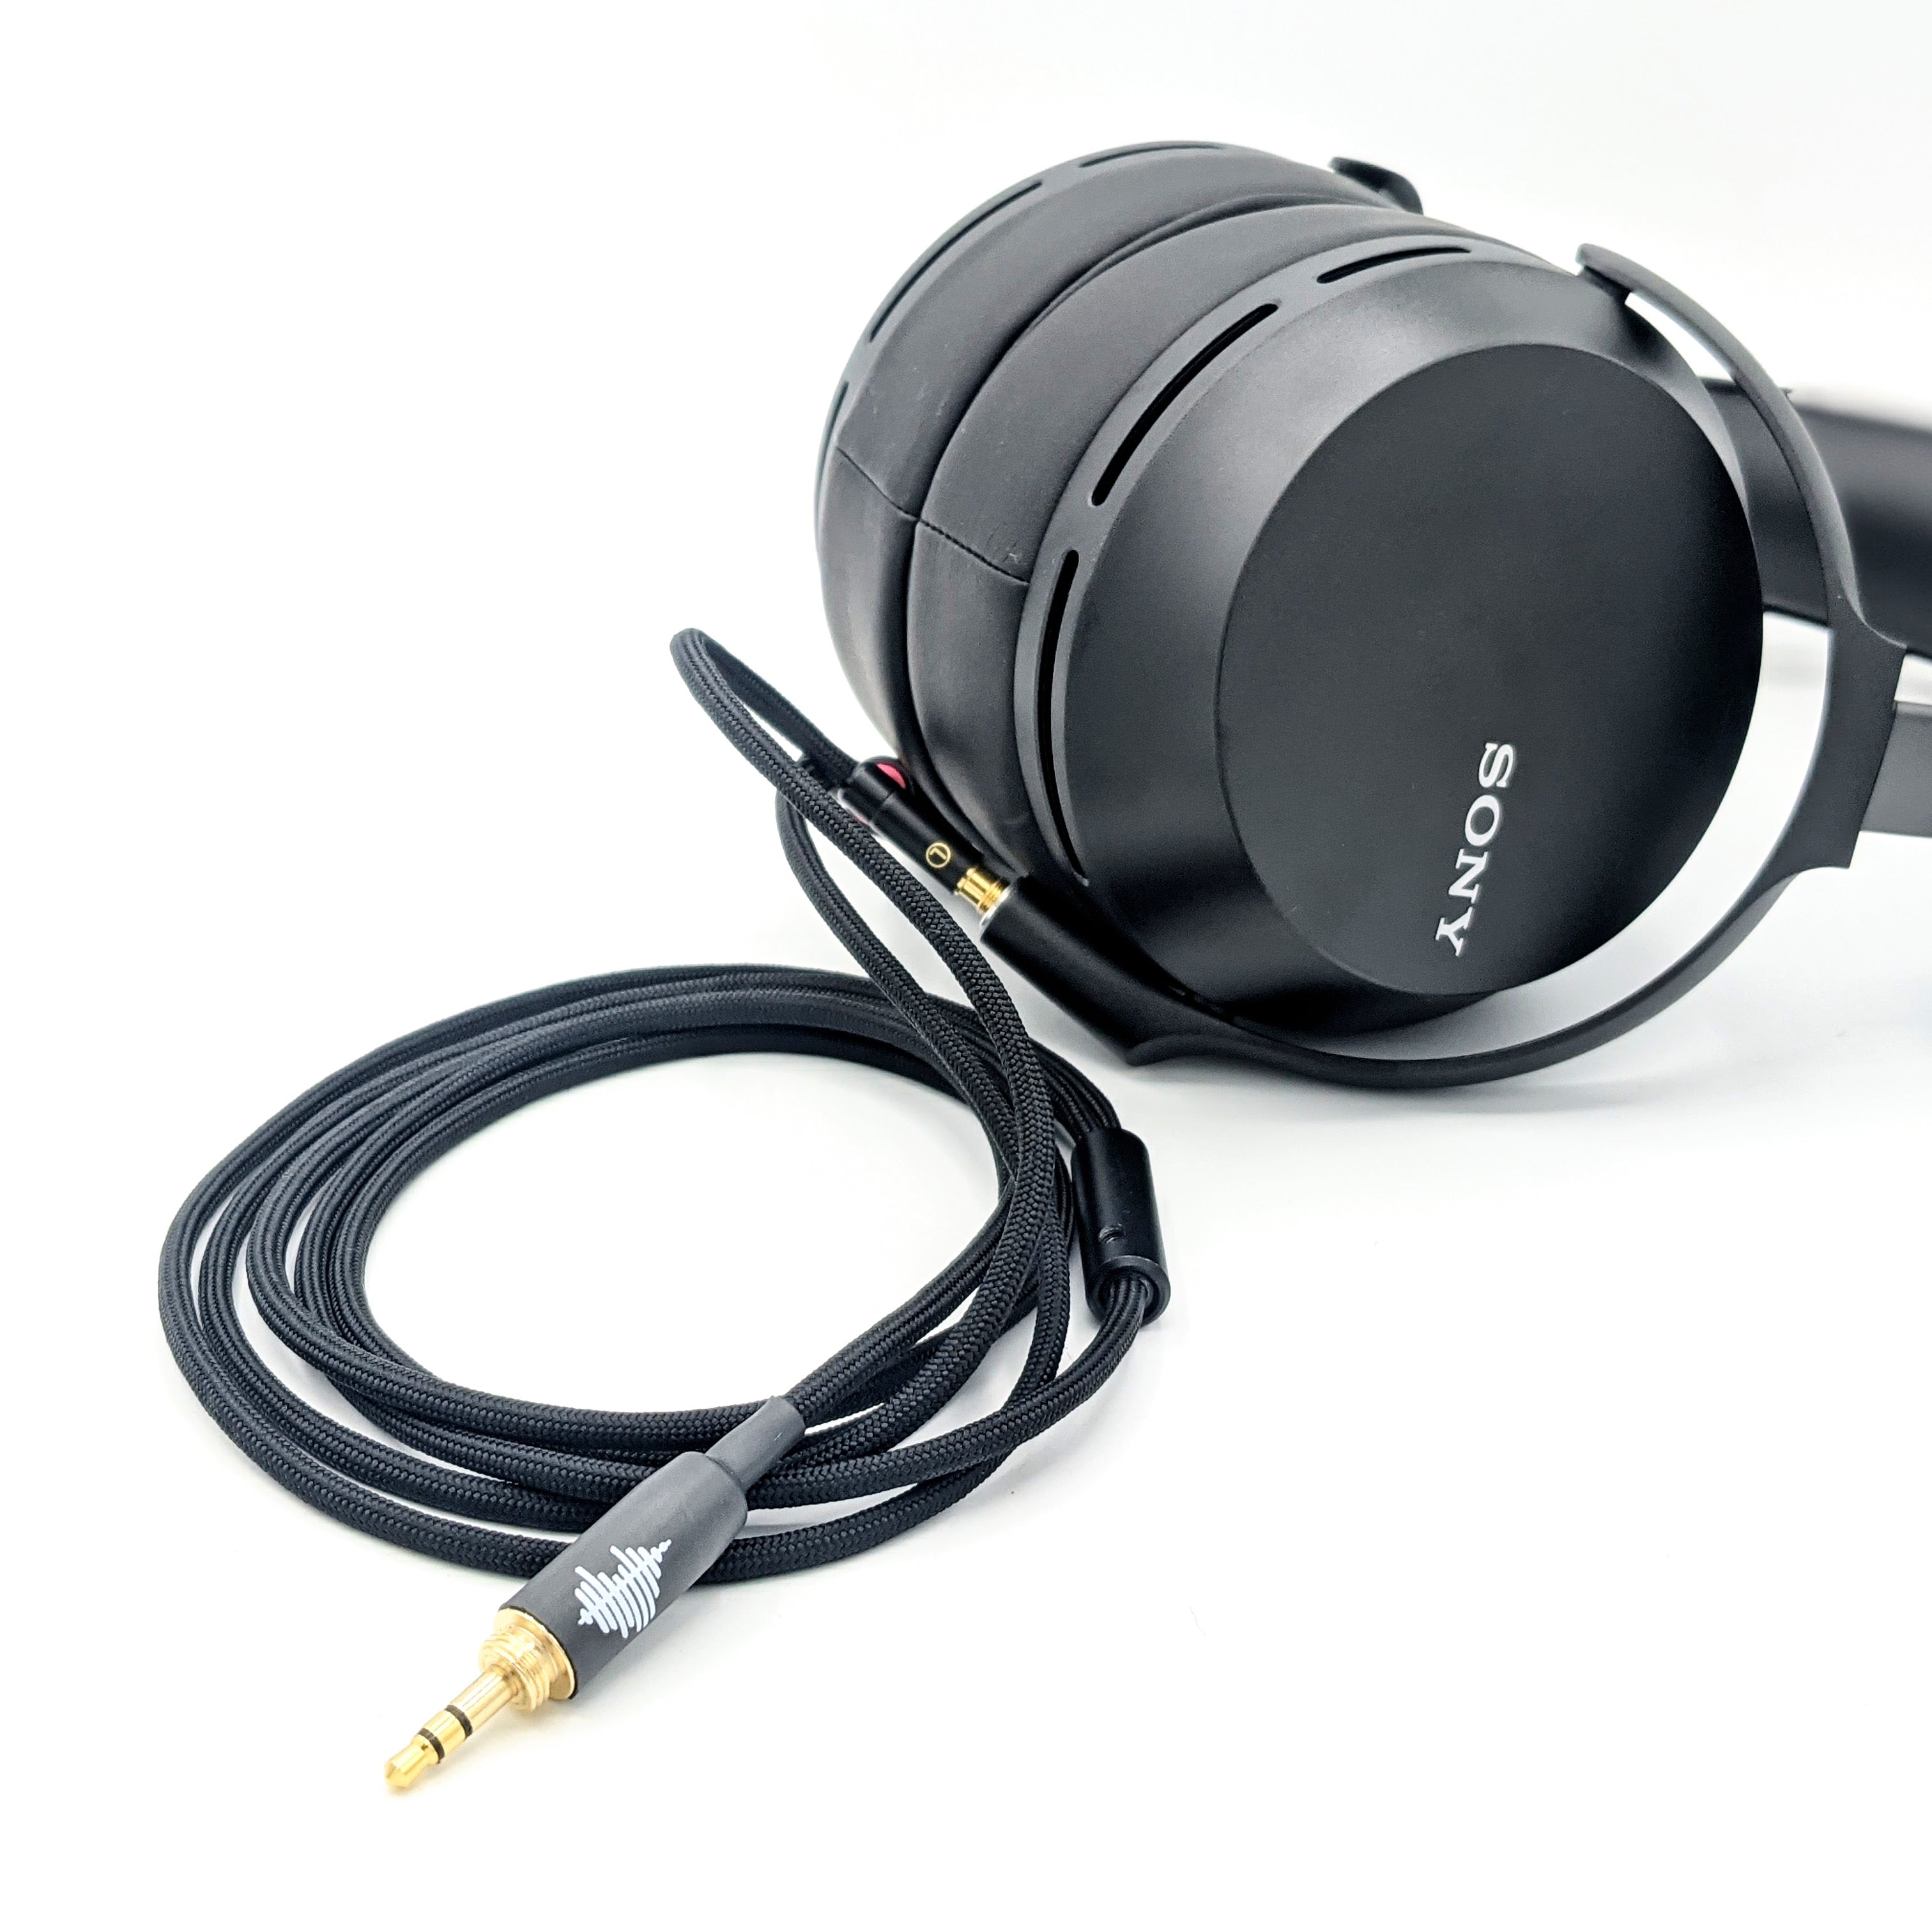 Dual 3.5mm Cable for Sony, Beyerdynamic headphones and more